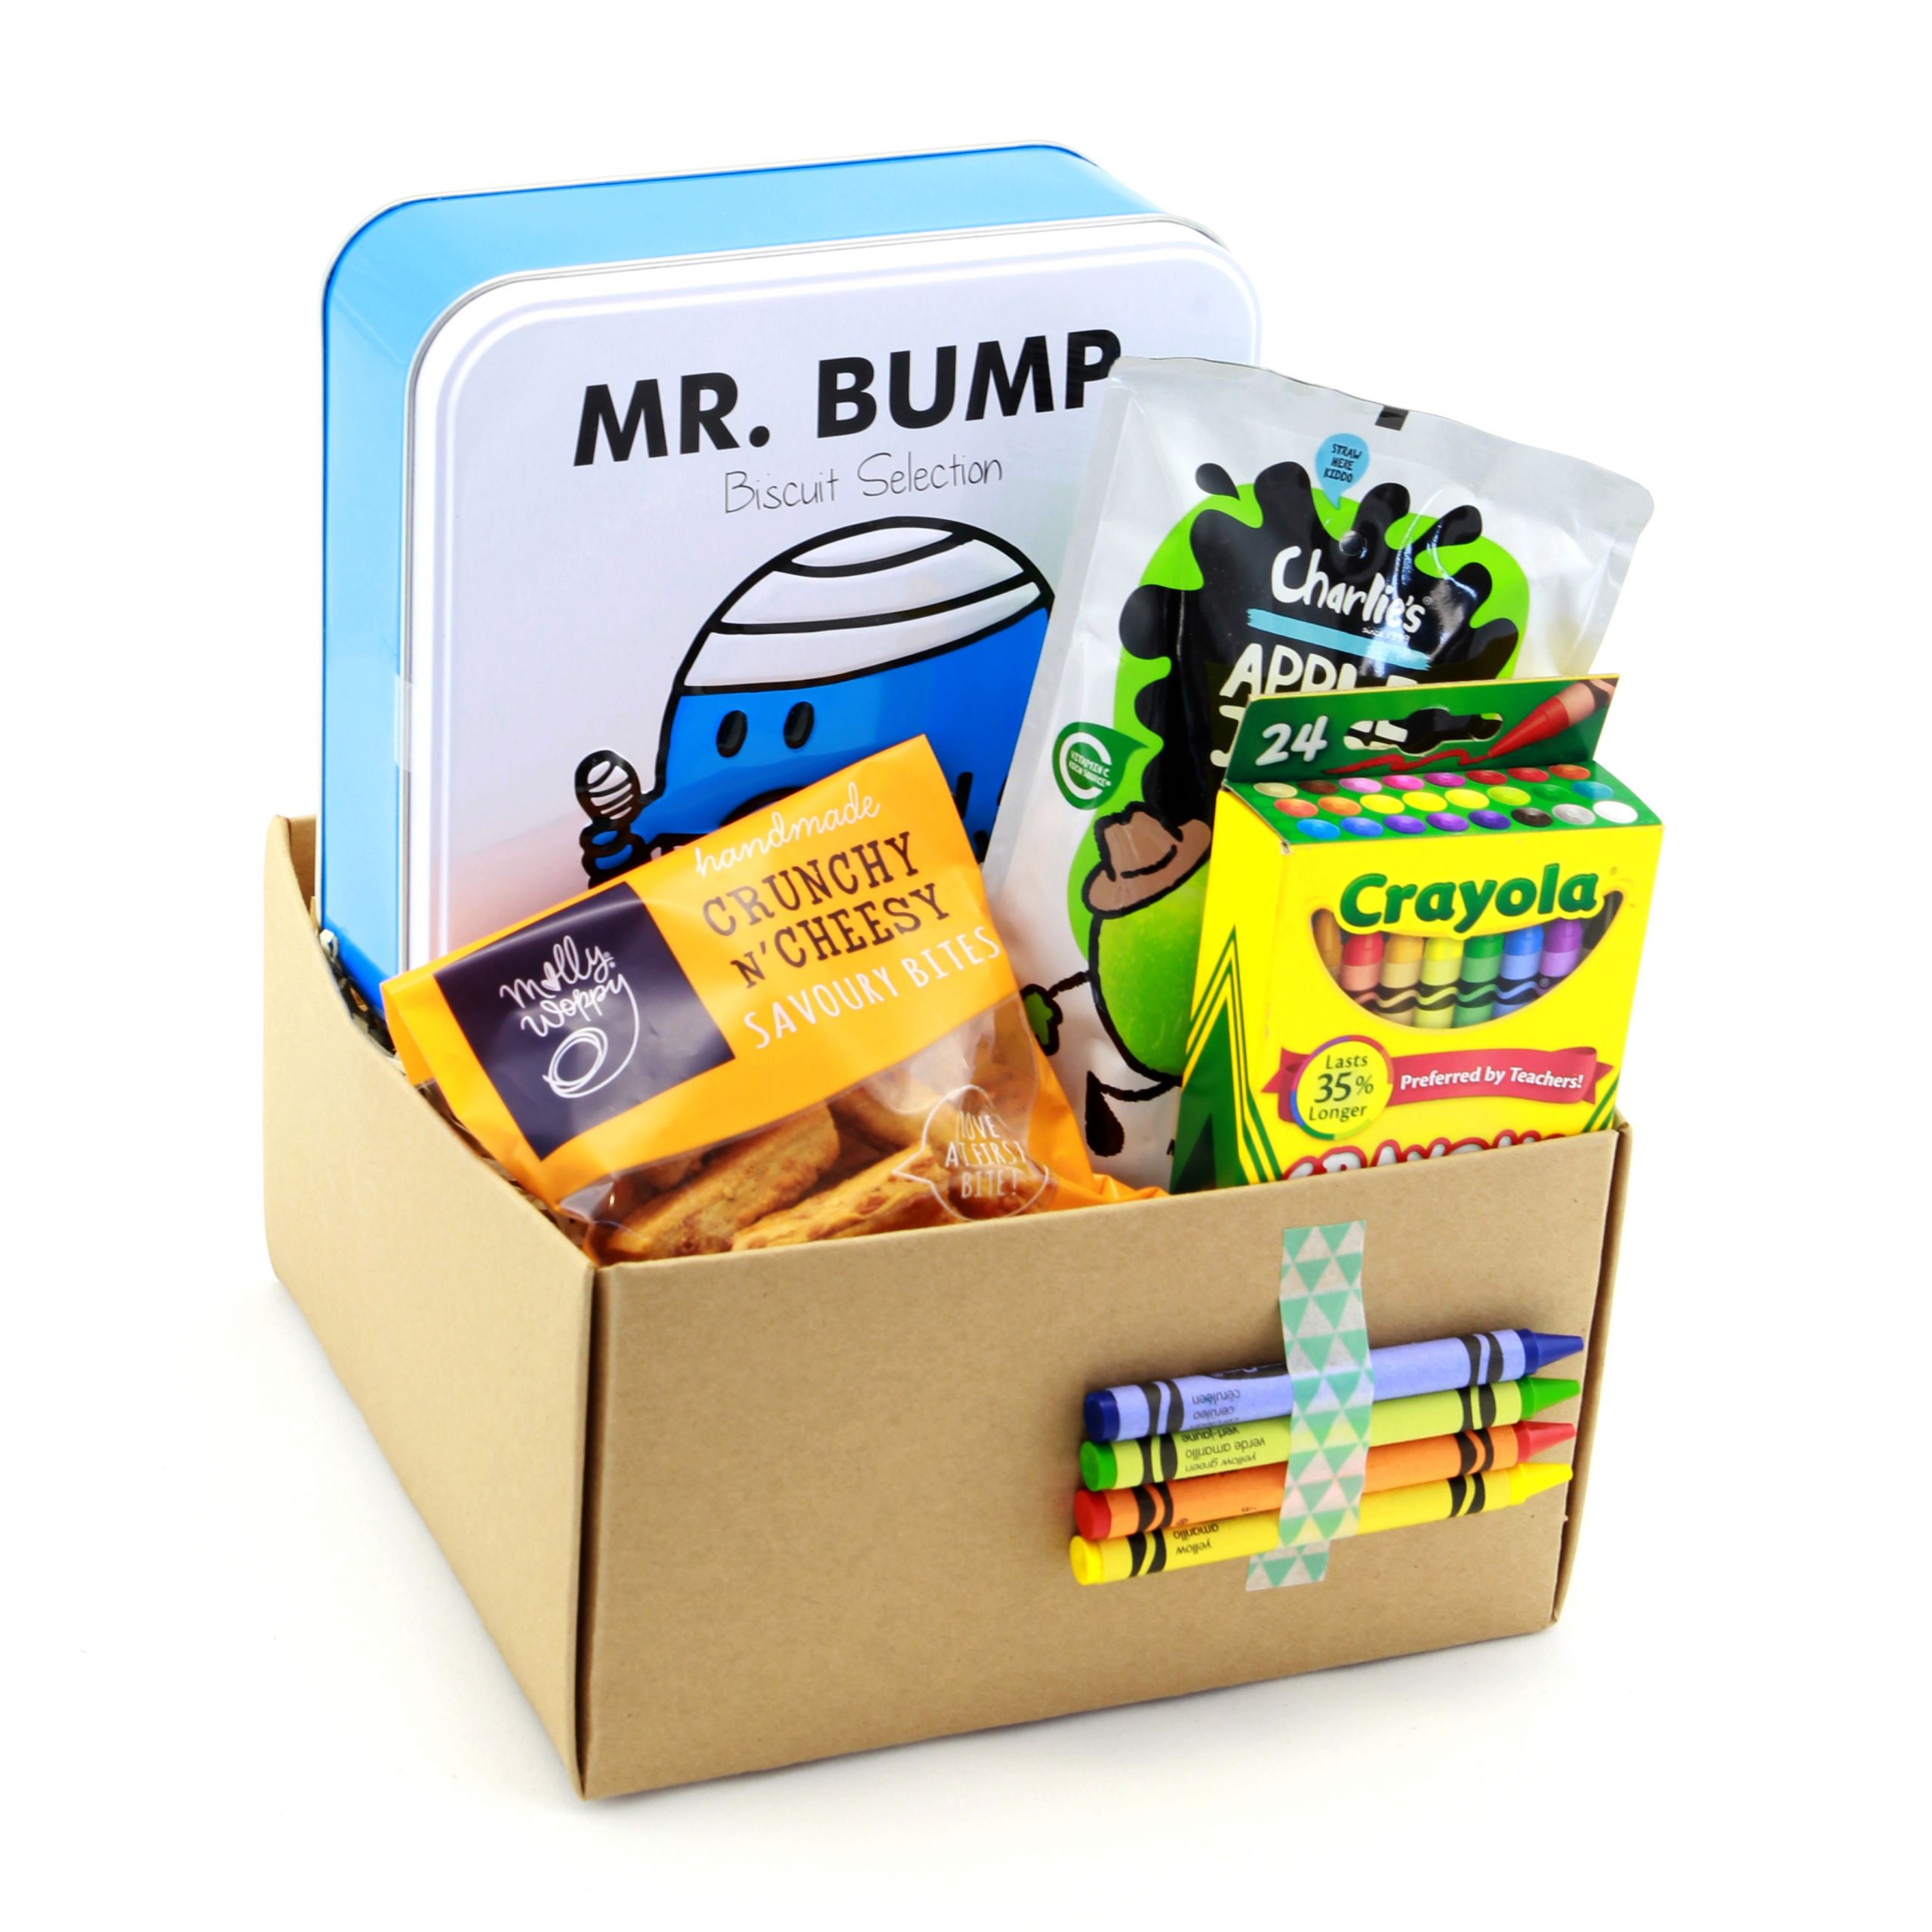 Kids Get Well Gifts
 Kids Get Well Gifts Gift Box Gifts for Kids